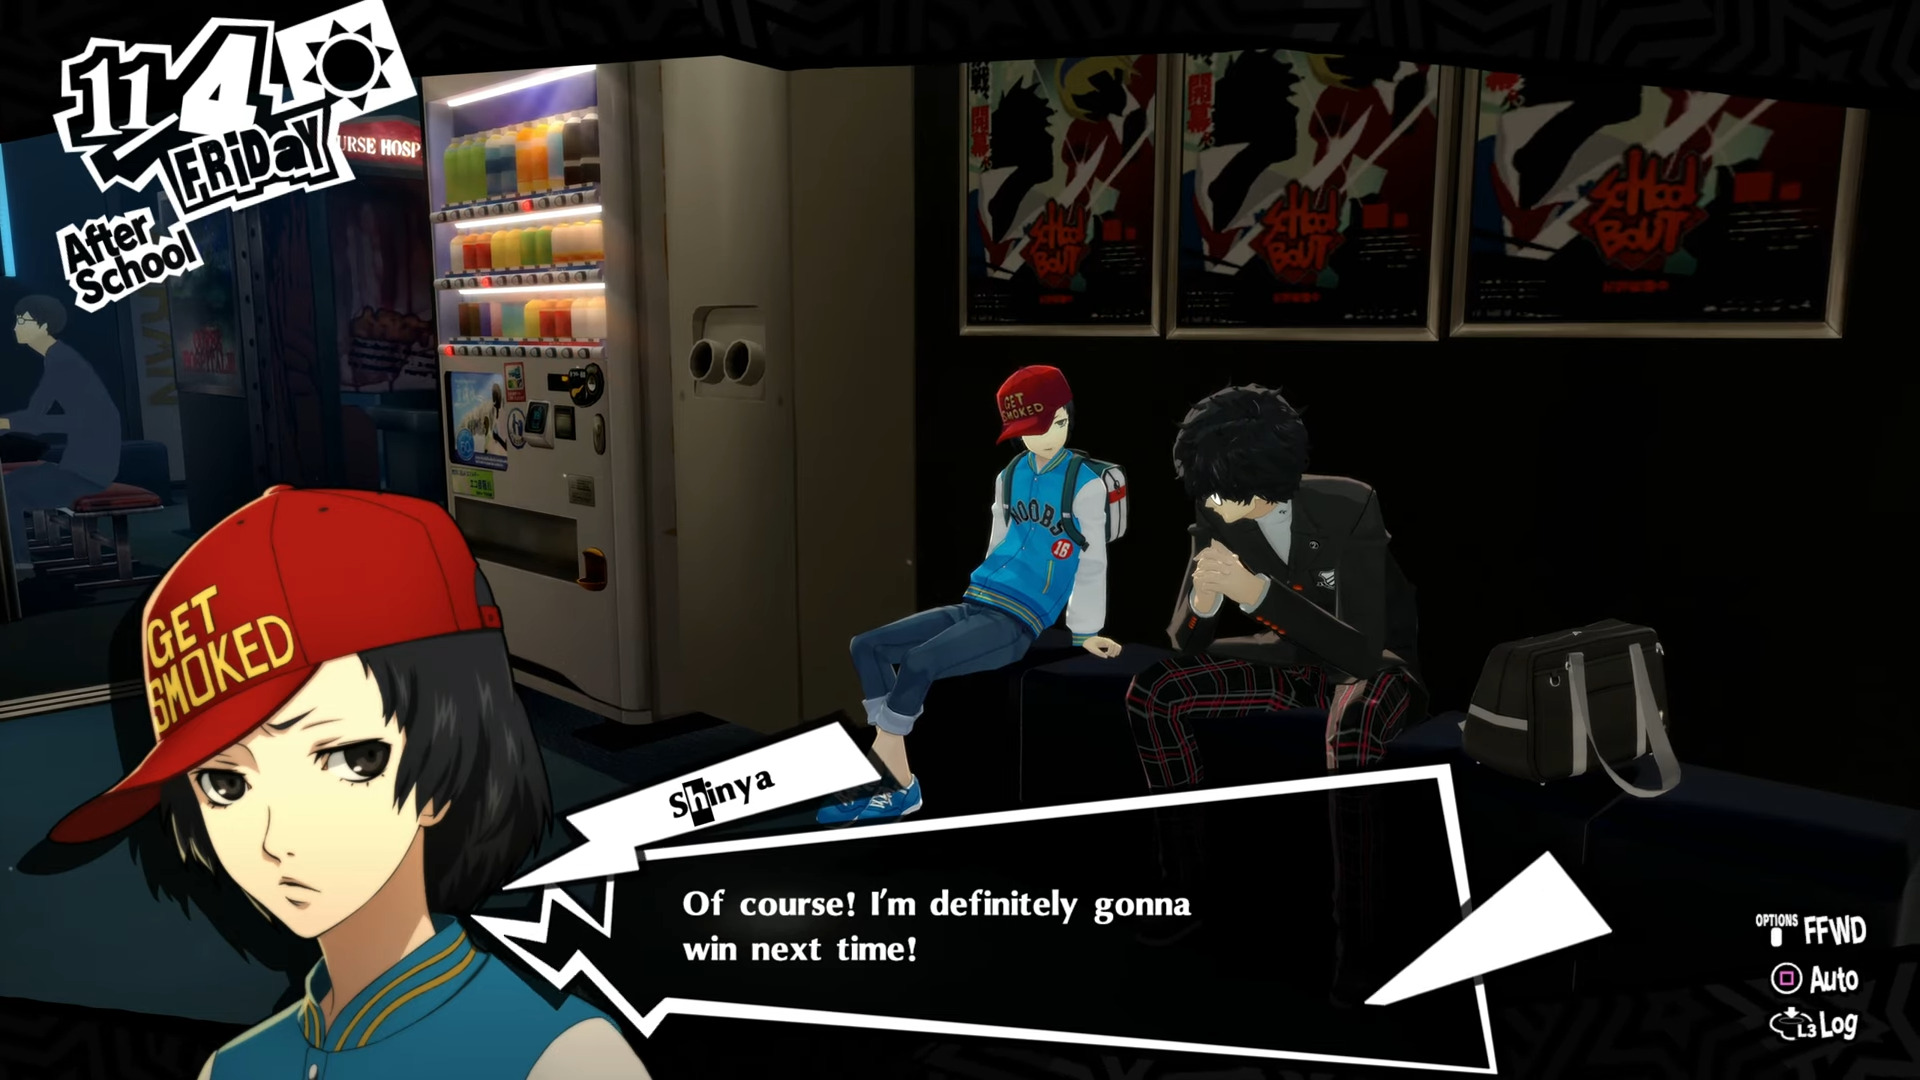 Persona 5 Royal English Gameplay Footage, Atlus Confirms Localization  Changes and Improvements - Persona Central